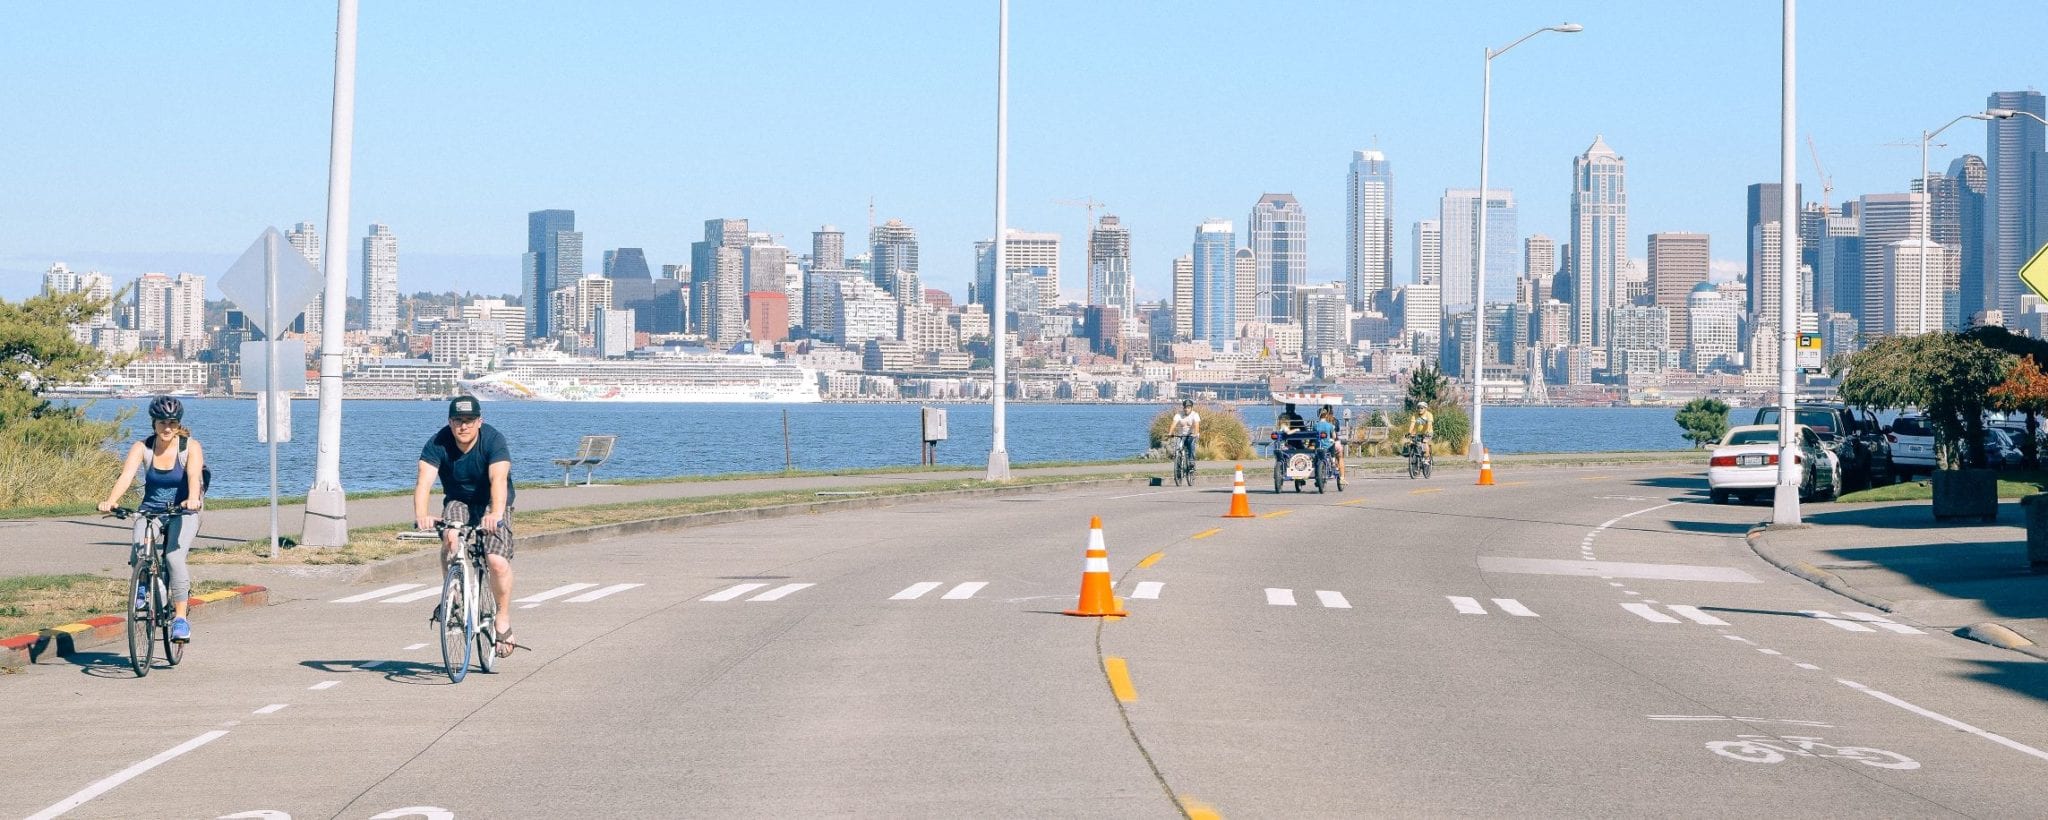 People riding bikes along Alki Beach with Seattle Skyline in background